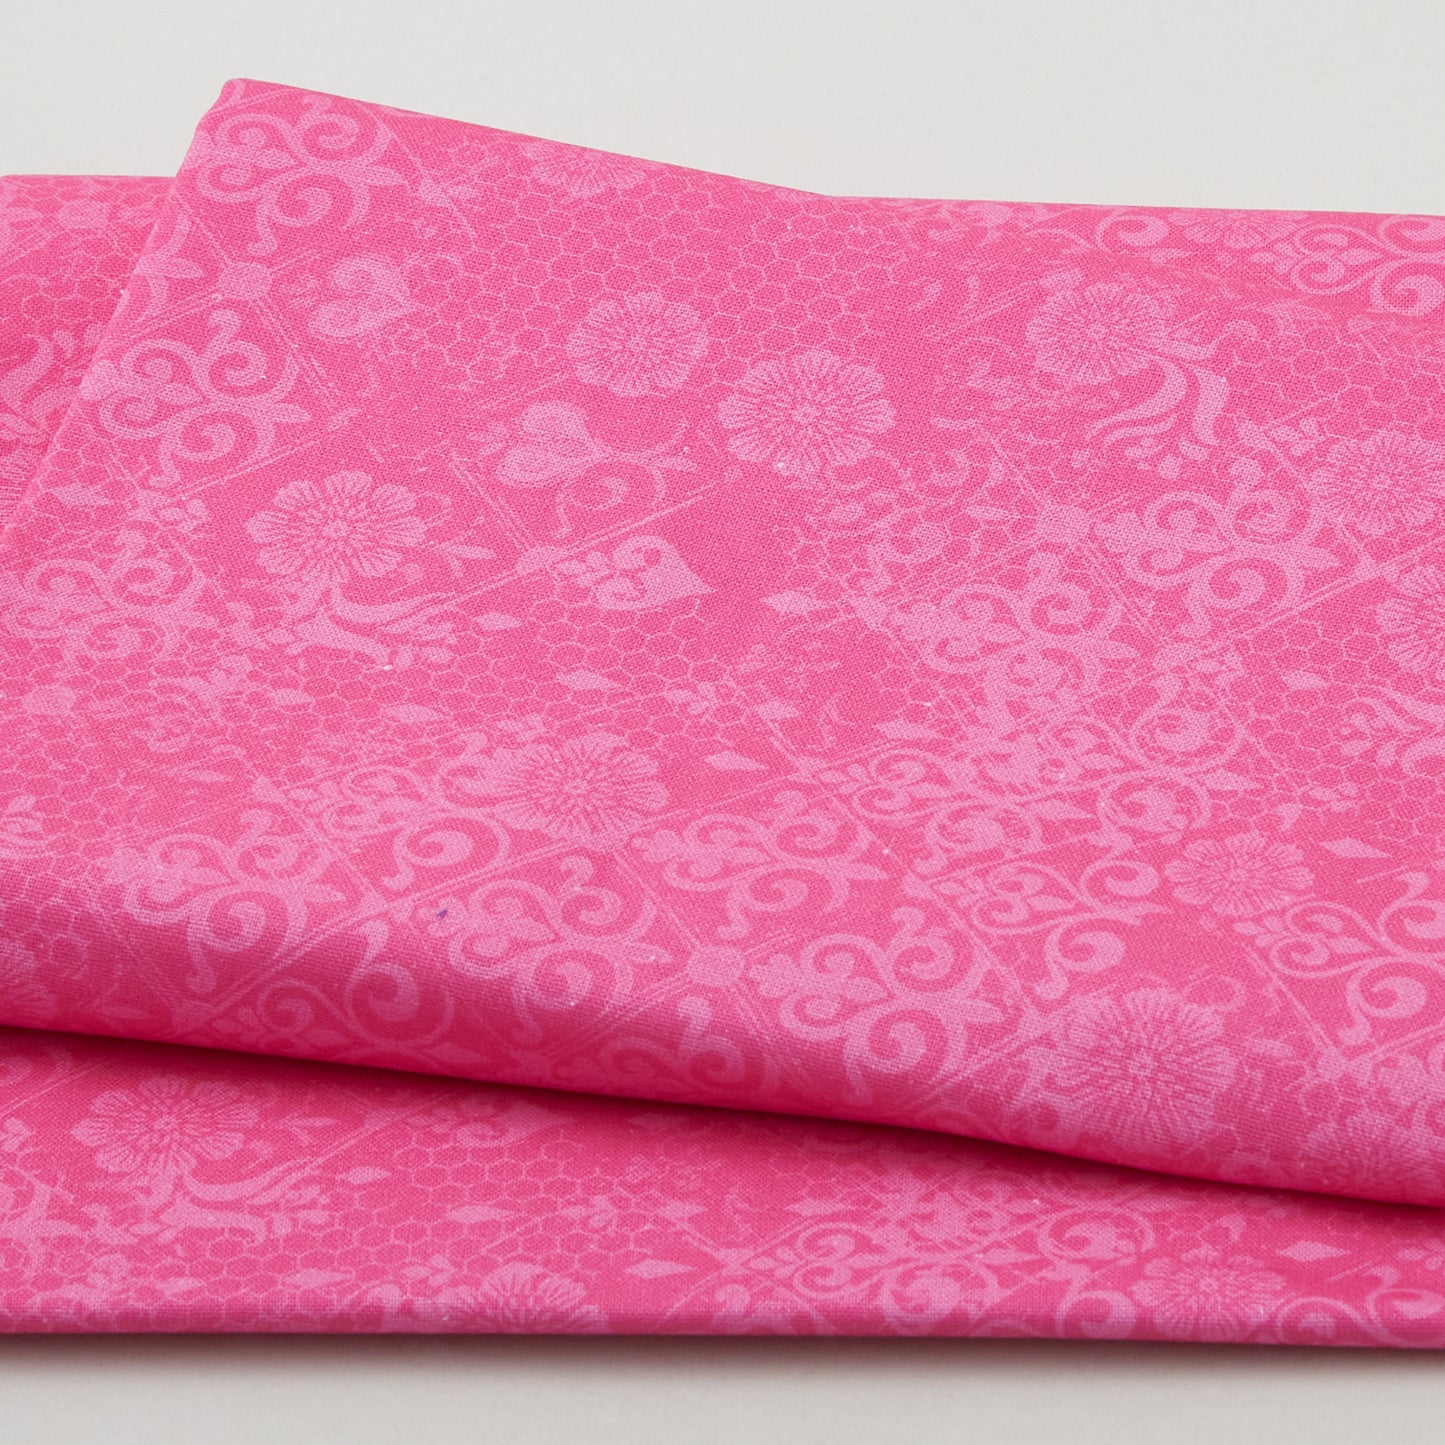 Mixed Medallion Blender - Pink 2 Yard Cut Primary Image